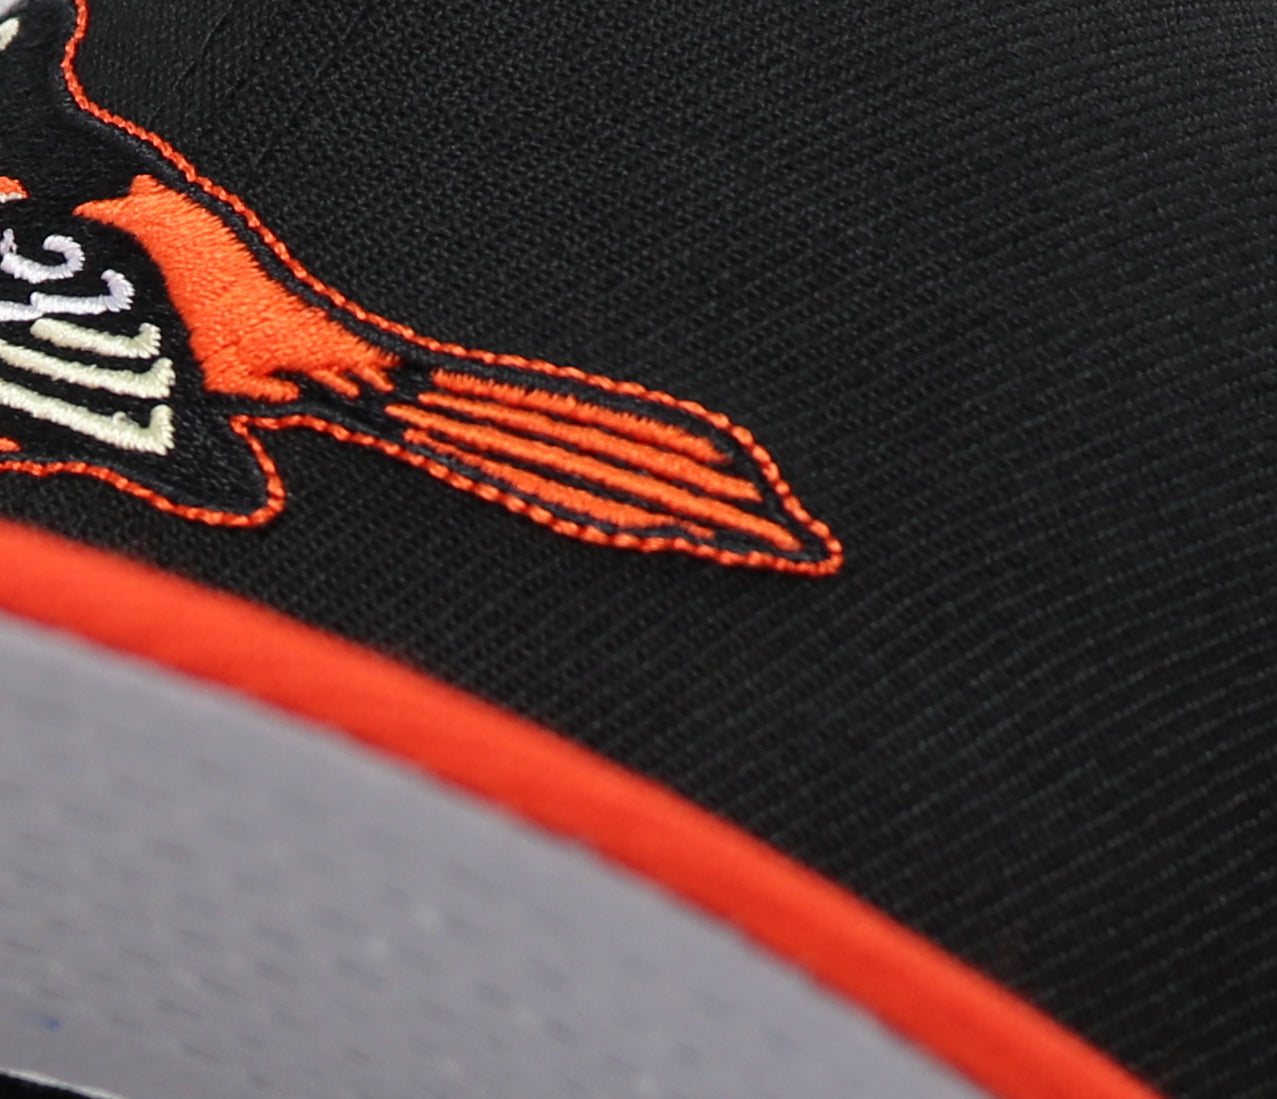 BALTIMORE ORIOLES (1999 HOME) NEW ERA 59FIFTY FITTED